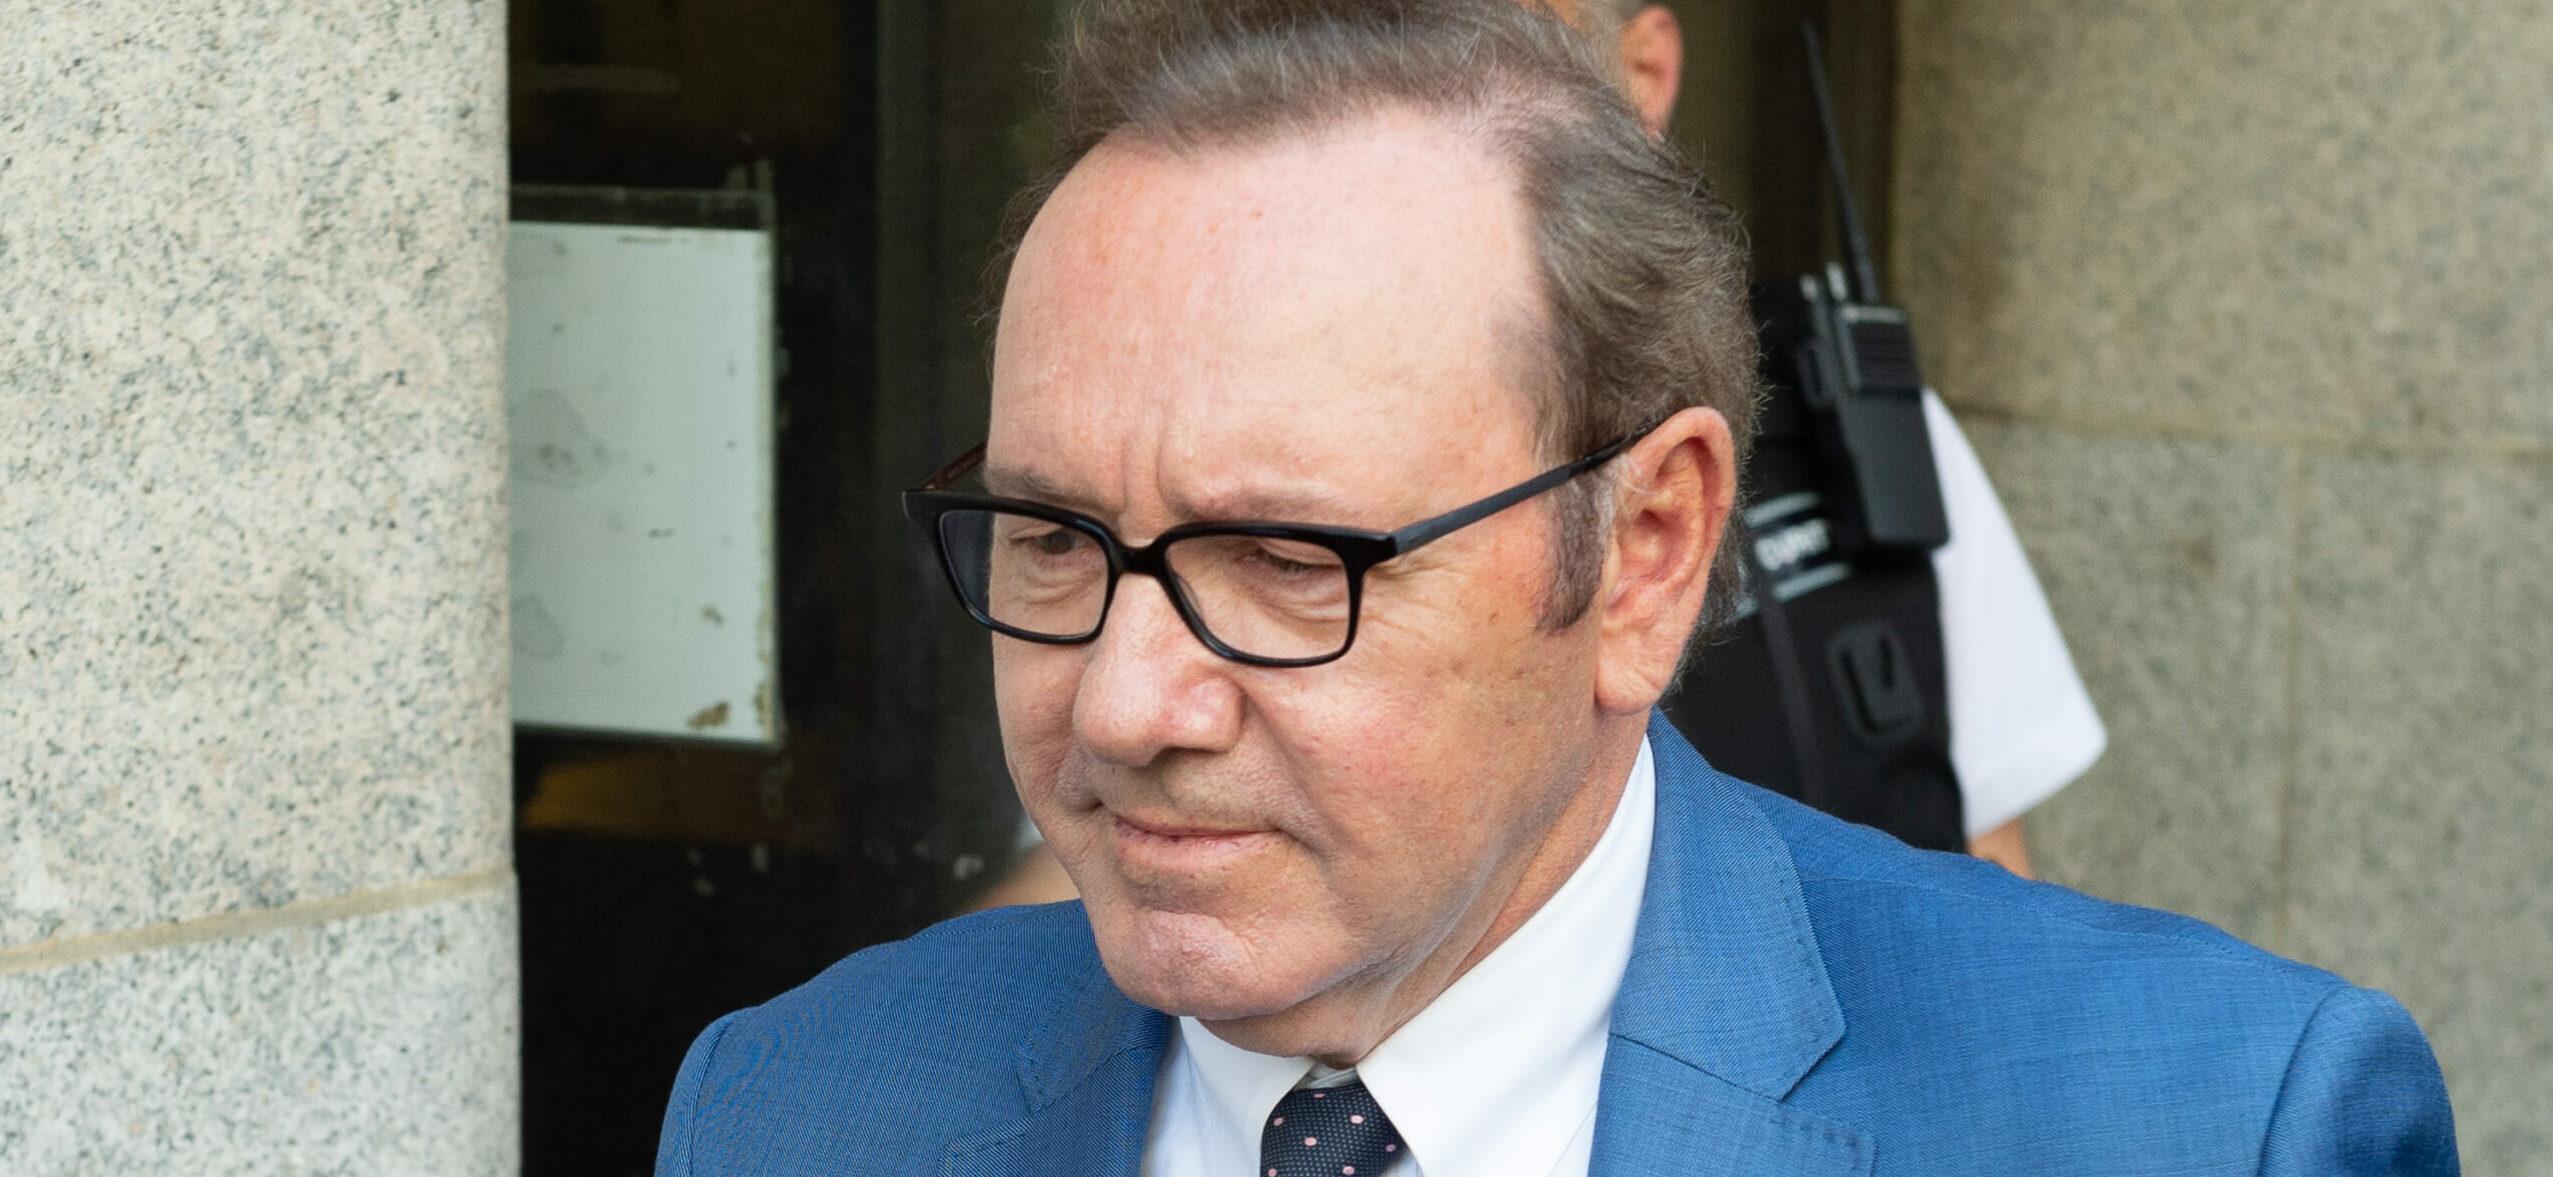 Kevin Spacey Tags Accuser And Prosecution’s Case As ‘Weak’